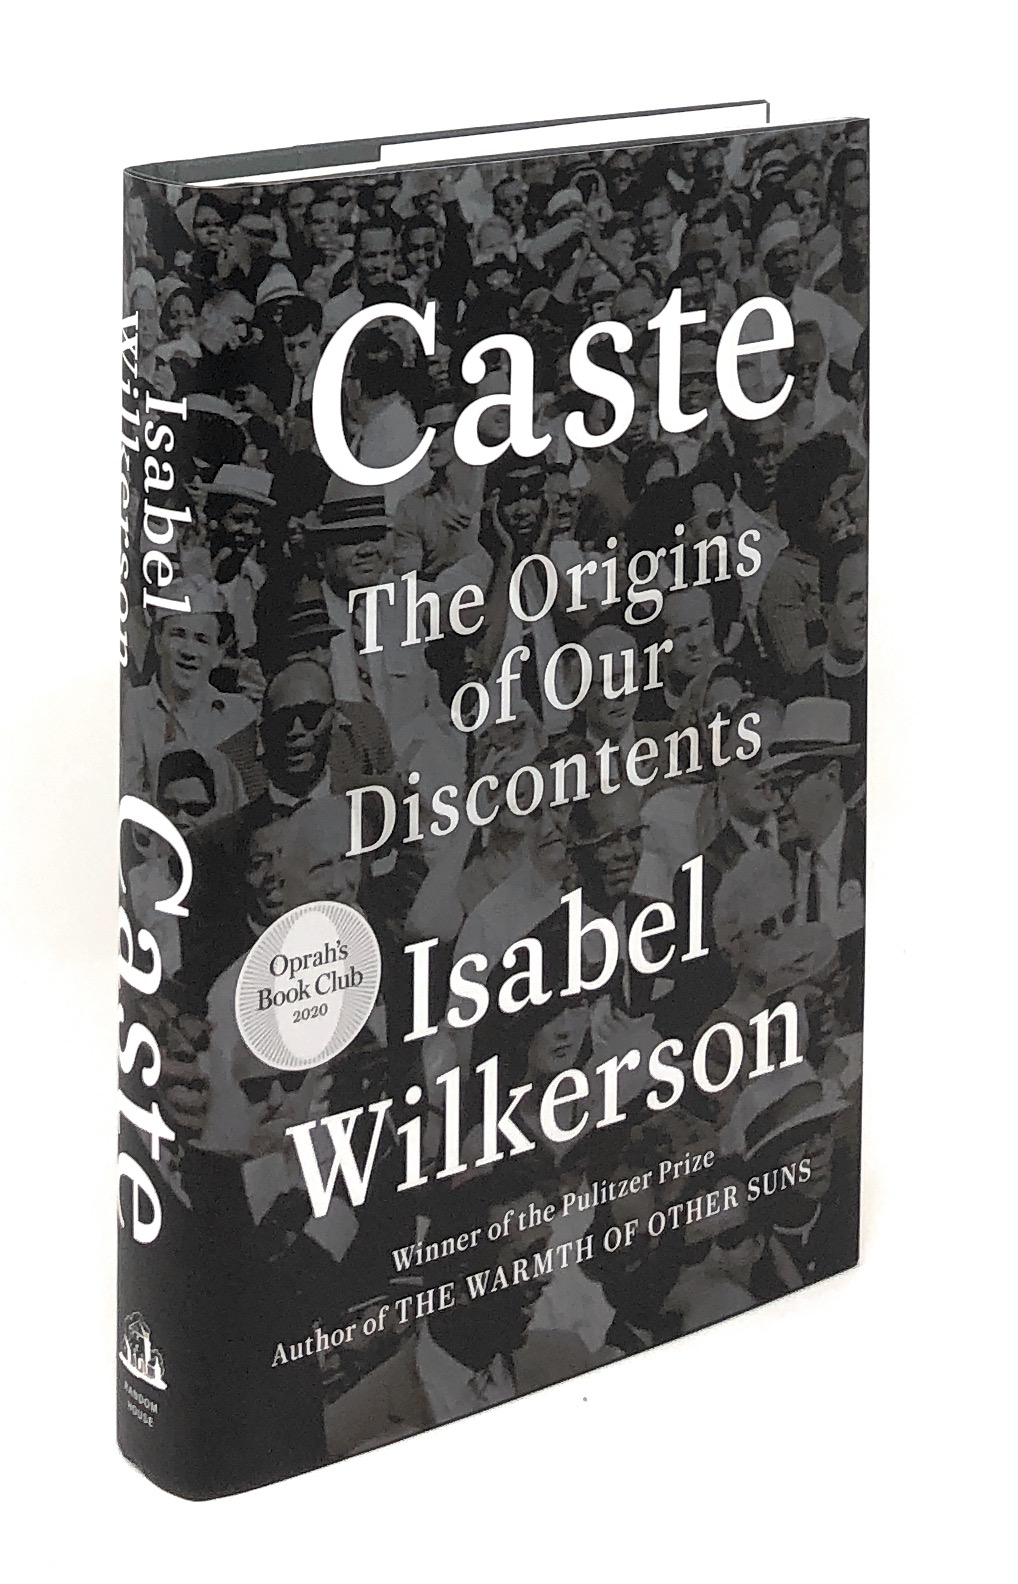 caste the origins of our discontents pdf free download